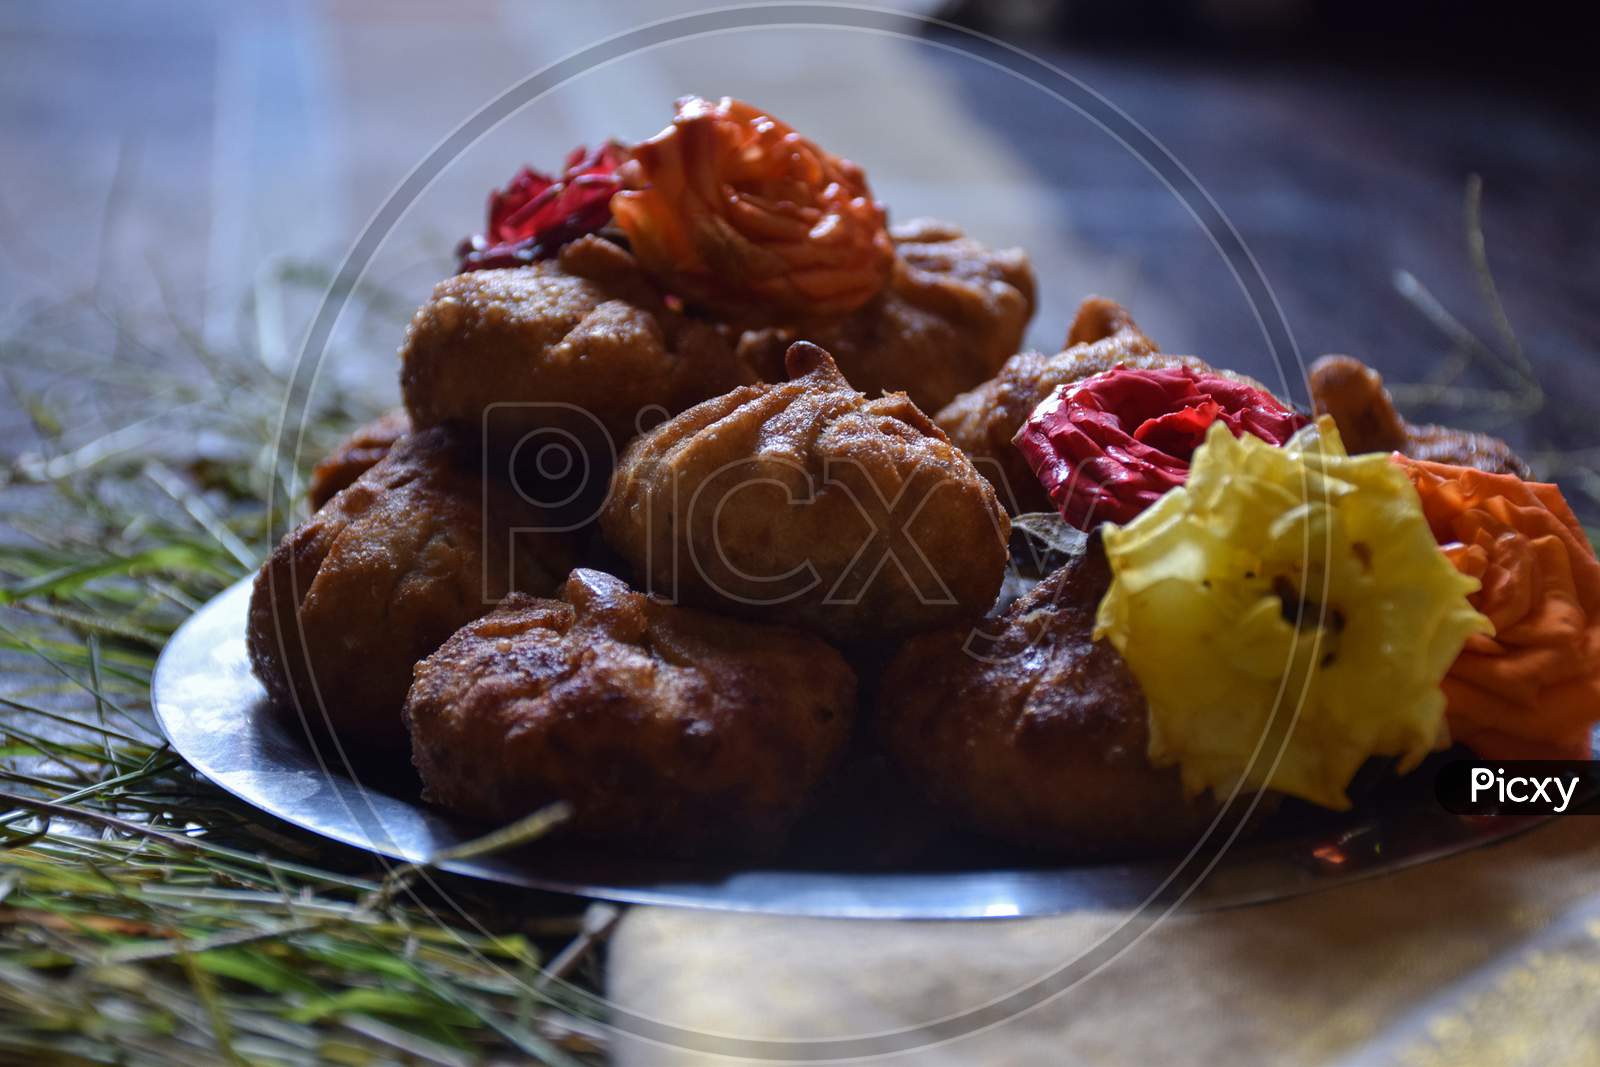 Modak Or Sweet Fried Mo-Mos ,It Is A Traditional And Popular Indian Sweet Dish Made During The Ganpati Festival In India